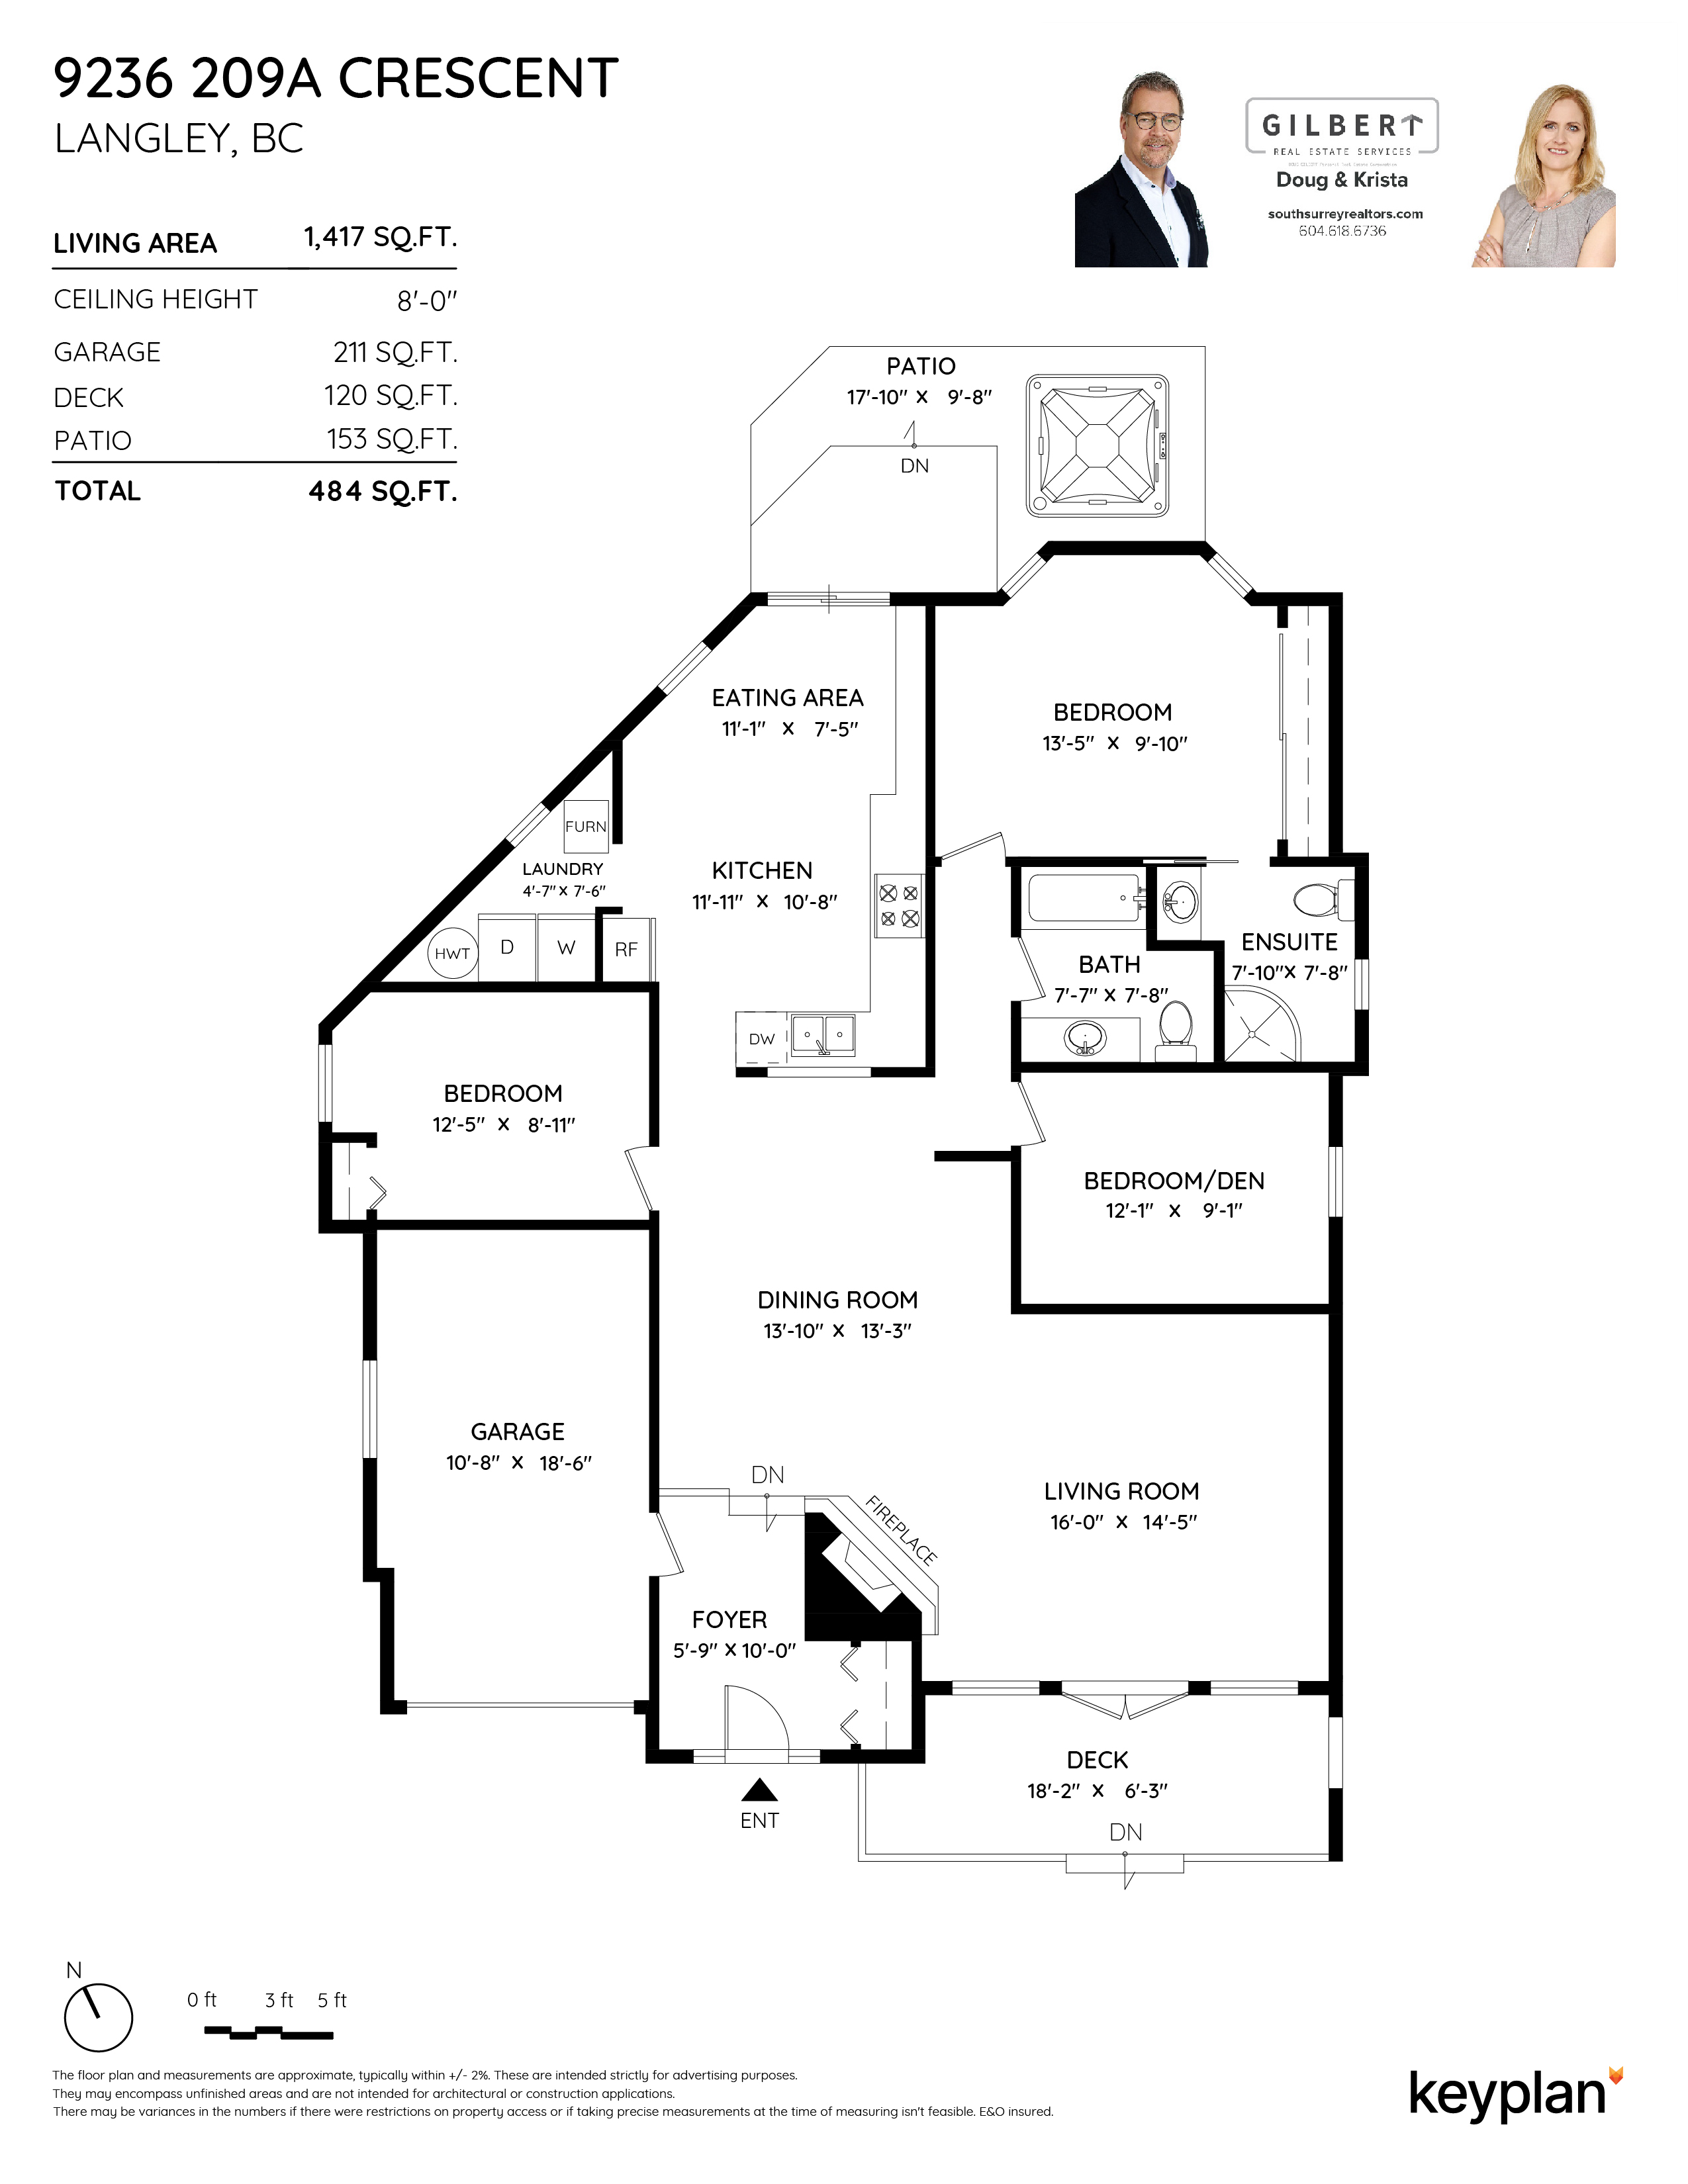 GILBERT Real Estate Group - 9236 209A Crescent, Langley, BC, Canada | Floor Plan 1